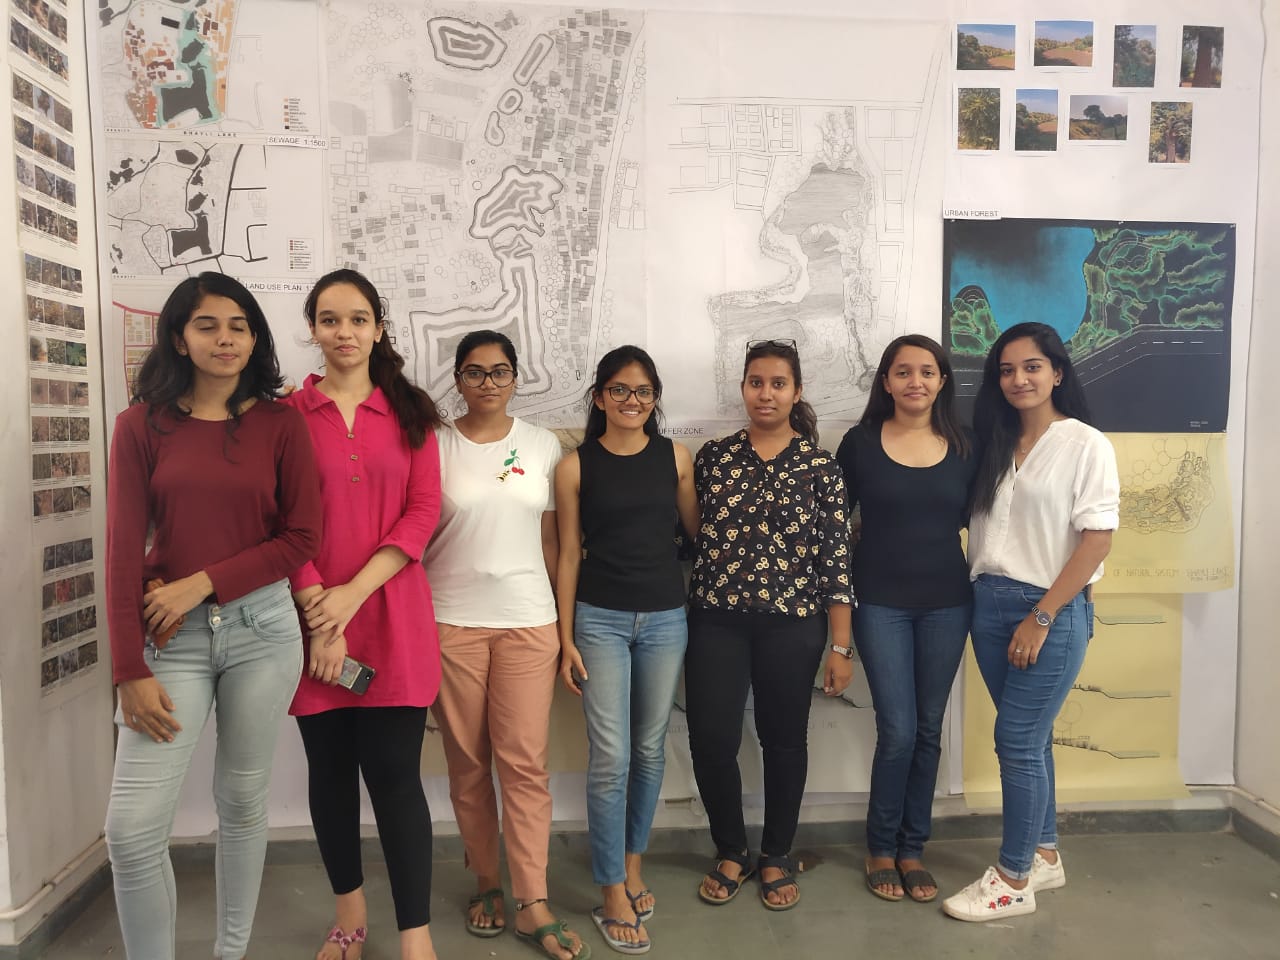 Vadodaras vanishing heritage structures and lakes focus of NUV students